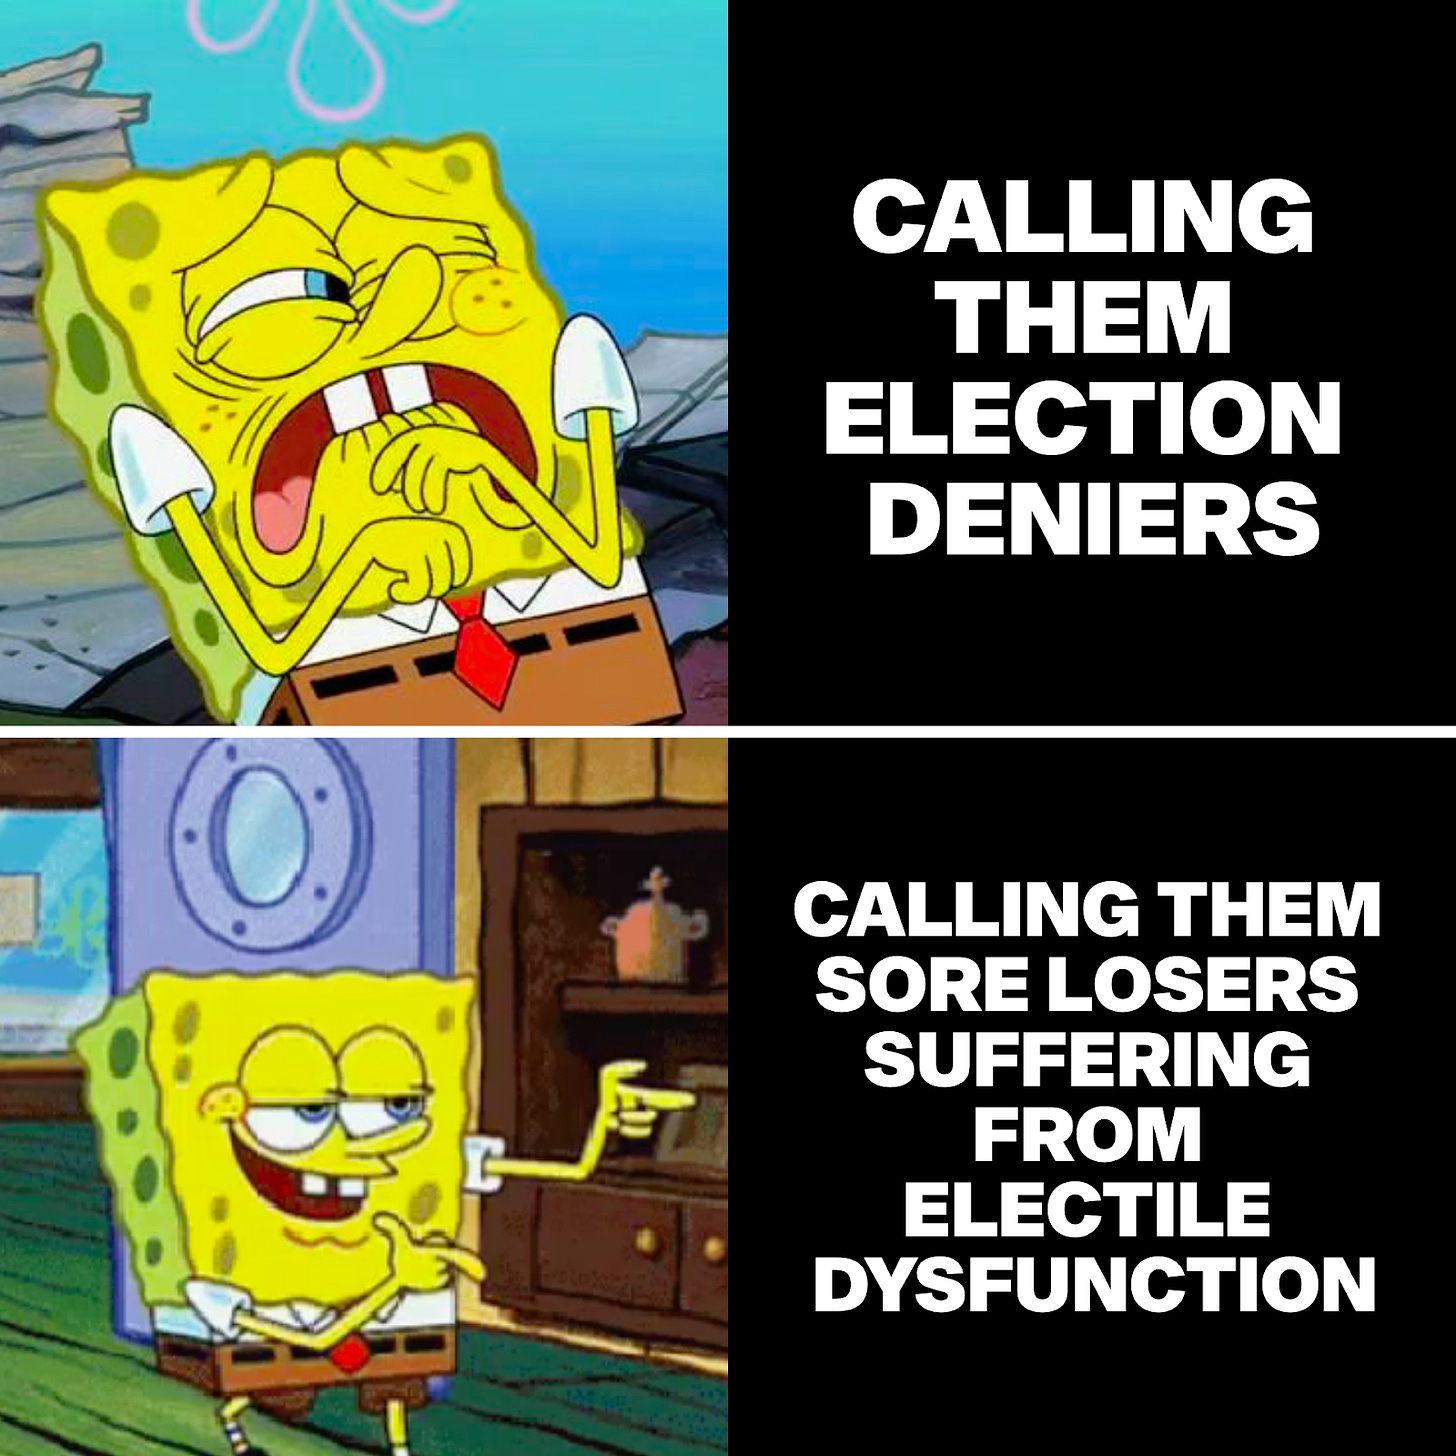 Top panel: SpongeBob looking worried and disgusted with caption :"Calling them election deniers". Bottom panel: SpongeBob looking happy and relaxed with caption "Calling them sore losers suffering from elective dysfunction"